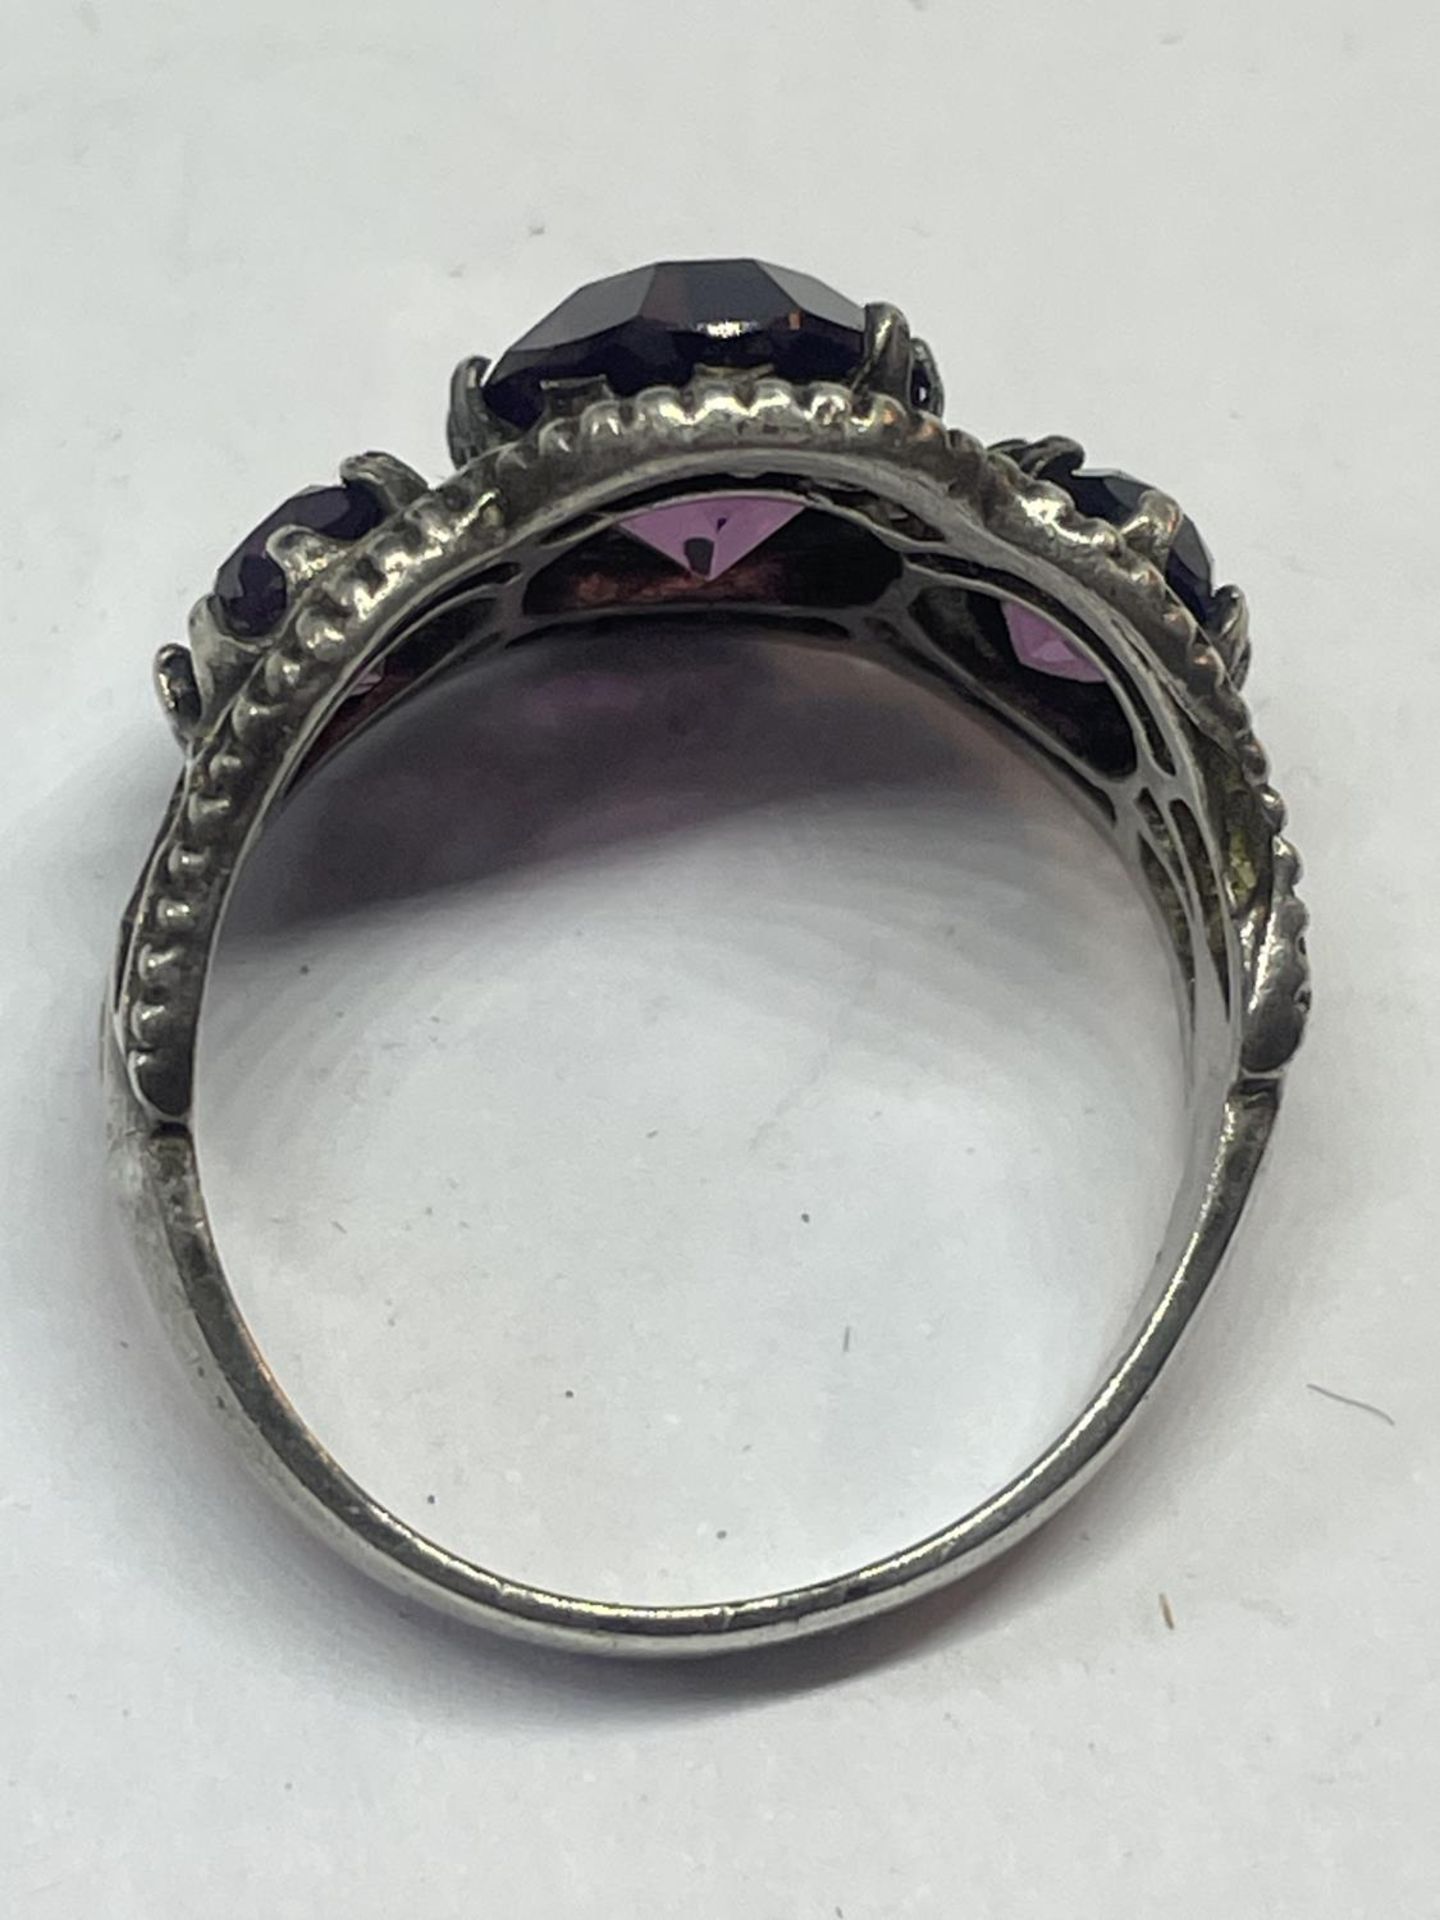 A SILVER RING WITH AMETHYST COLOURED STONES - Image 3 of 3